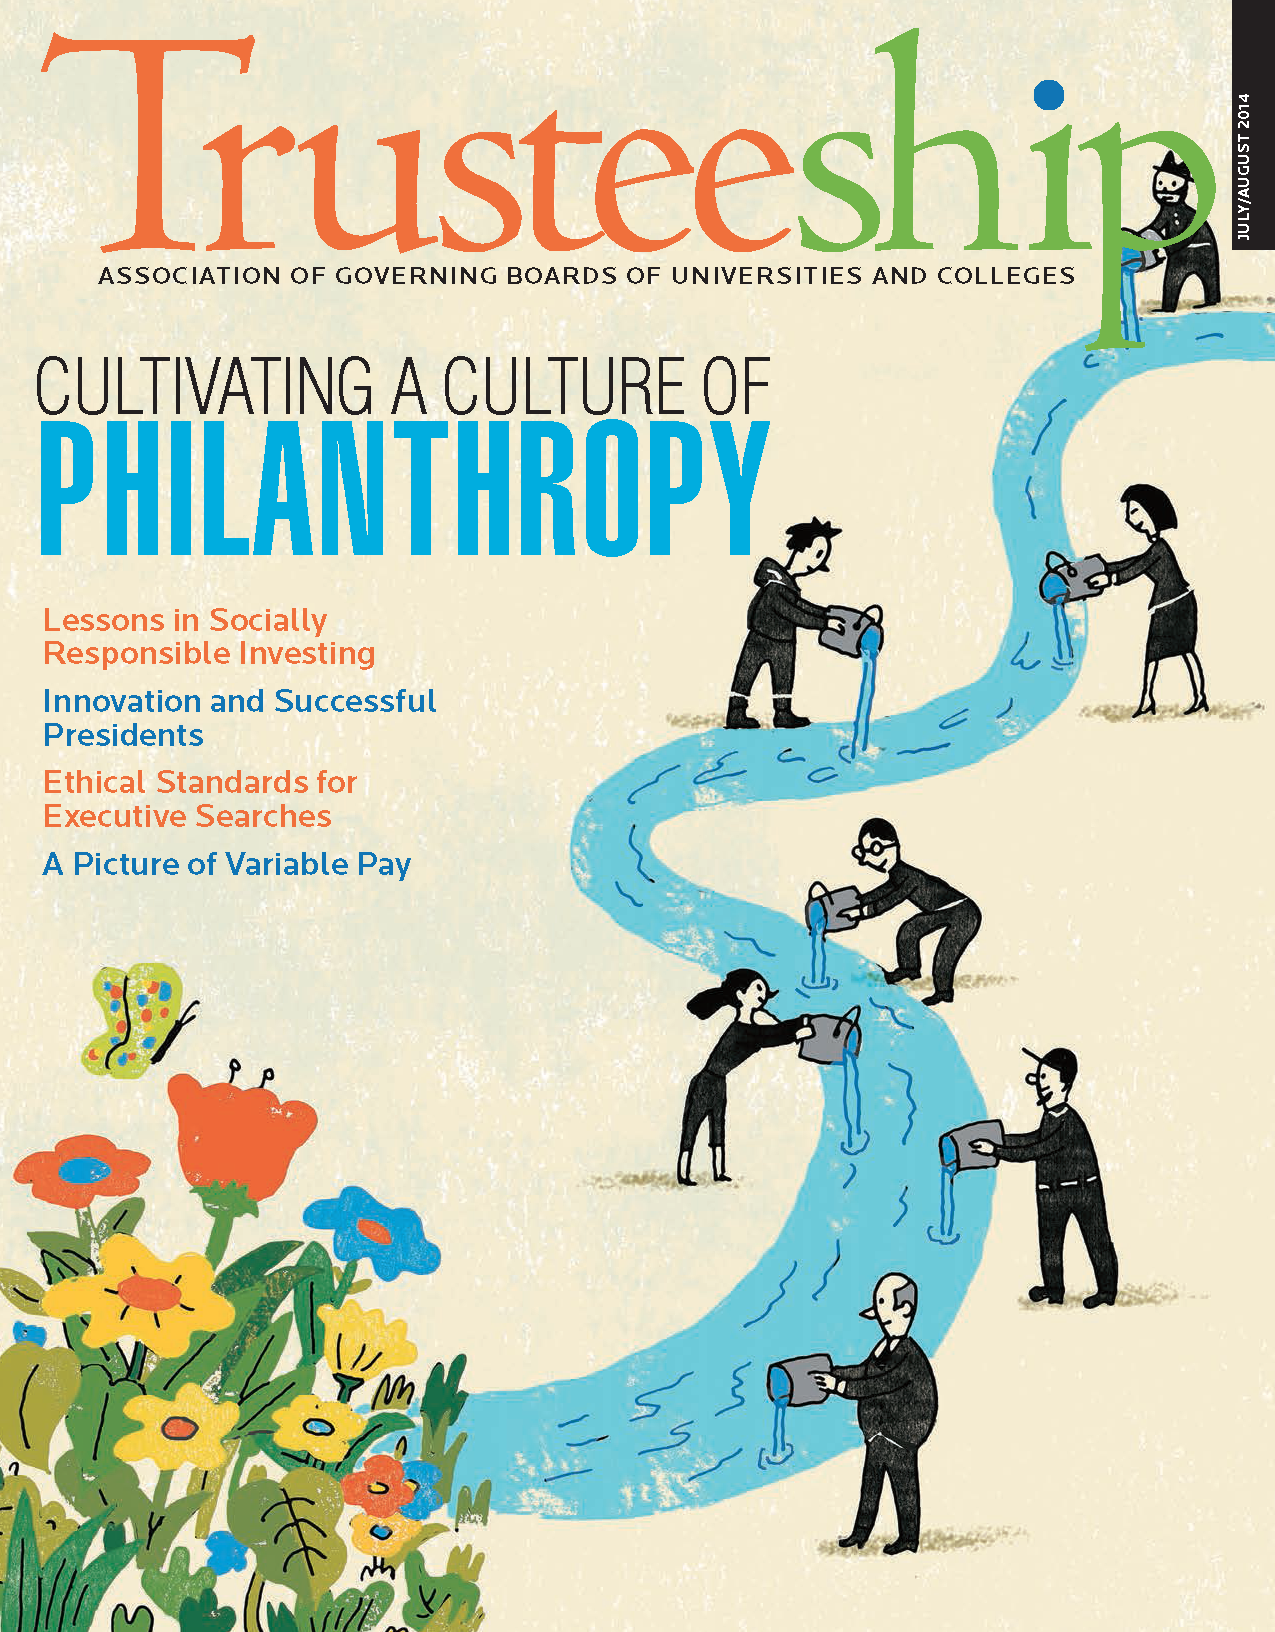 AGB Trusteeship Magazine: July/August 2014, with cover article "Cultivating a culture of philanthropy"